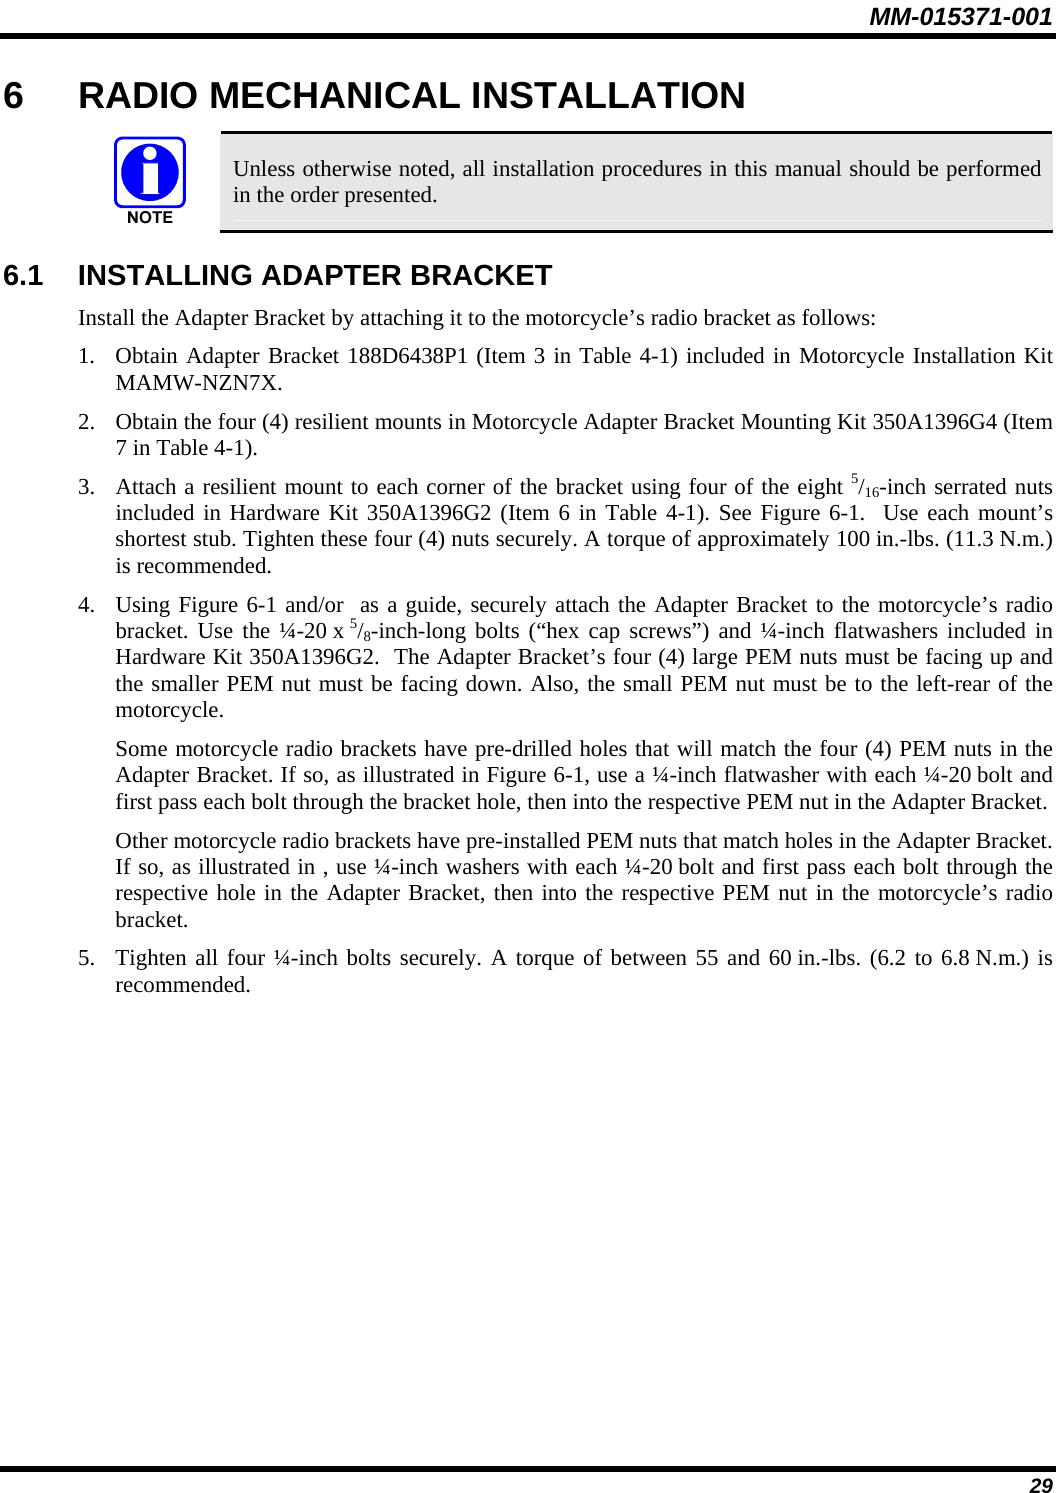 MM-015371-001 6  RADIO MECHANICAL INSTALLATION   Unless otherwise noted, all installation procedures in this manual should be performed in the order presented. 6.1  INSTALLING ADAPTER BRACKET Install the Adapter Bracket by attaching it to the motorcycle’s radio bracket as follows: 1. Obtain Adapter Bracket 188D6438P1 (Item 3 in Table 4-1) included in Motorcycle Installation Kit MAMW-NZN7X. 2. Obtain the four (4) resilient mounts in Motorcycle Adapter Bracket Mounting Kit 350A1396G4 (Item 7 in Table 4-1). 3. Attach a resilient mount to each corner of the bracket using four of the eight 5/16-inch serrated nuts included in Hardware Kit 350A1396G2 (Item 6 in Table 4-1). See Figure 6-1.  Use each mount’s shortest stub. Tighten these four (4) nuts securely. A torque of approximately 100 in.-lbs. (11.3 N.m.) is recommended. 4. Using Figure 6-1 and/or  as a guide, securely attach the Adapter Bracket to the motorcycle’s radio bracket. Use the ¼-20 x 5/8-inch-long bolts (“hex cap screws”) and ¼-inch flatwashers included in Hardware Kit 350A1396G2.  The Adapter Bracket’s four (4) large PEM nuts must be facing up and the smaller PEM nut must be facing down. Also, the small PEM nut must be to the left-rear of the motorcycle. Some motorcycle radio brackets have pre-drilled holes that will match the four (4) PEM nuts in the Adapter Bracket. If so, as illustrated in Figure 6-1, use a ¼-inch flatwasher with each ¼-20 bolt and first pass each bolt through the bracket hole, then into the respective PEM nut in the Adapter Bracket. Other motorcycle radio brackets have pre-installed PEM nuts that match holes in the Adapter Bracket. If so, as illustrated in , use ¼-inch washers with each ¼-20 bolt and first pass each bolt through the respective hole in the Adapter Bracket, then into the respective PEM nut in the motorcycle’s radio bracket. 5. Tighten all four ¼-inch bolts securely. A torque of between 55 and 60 in.-lbs. (6.2 to 6.8 N.m.) is recommended. 29 